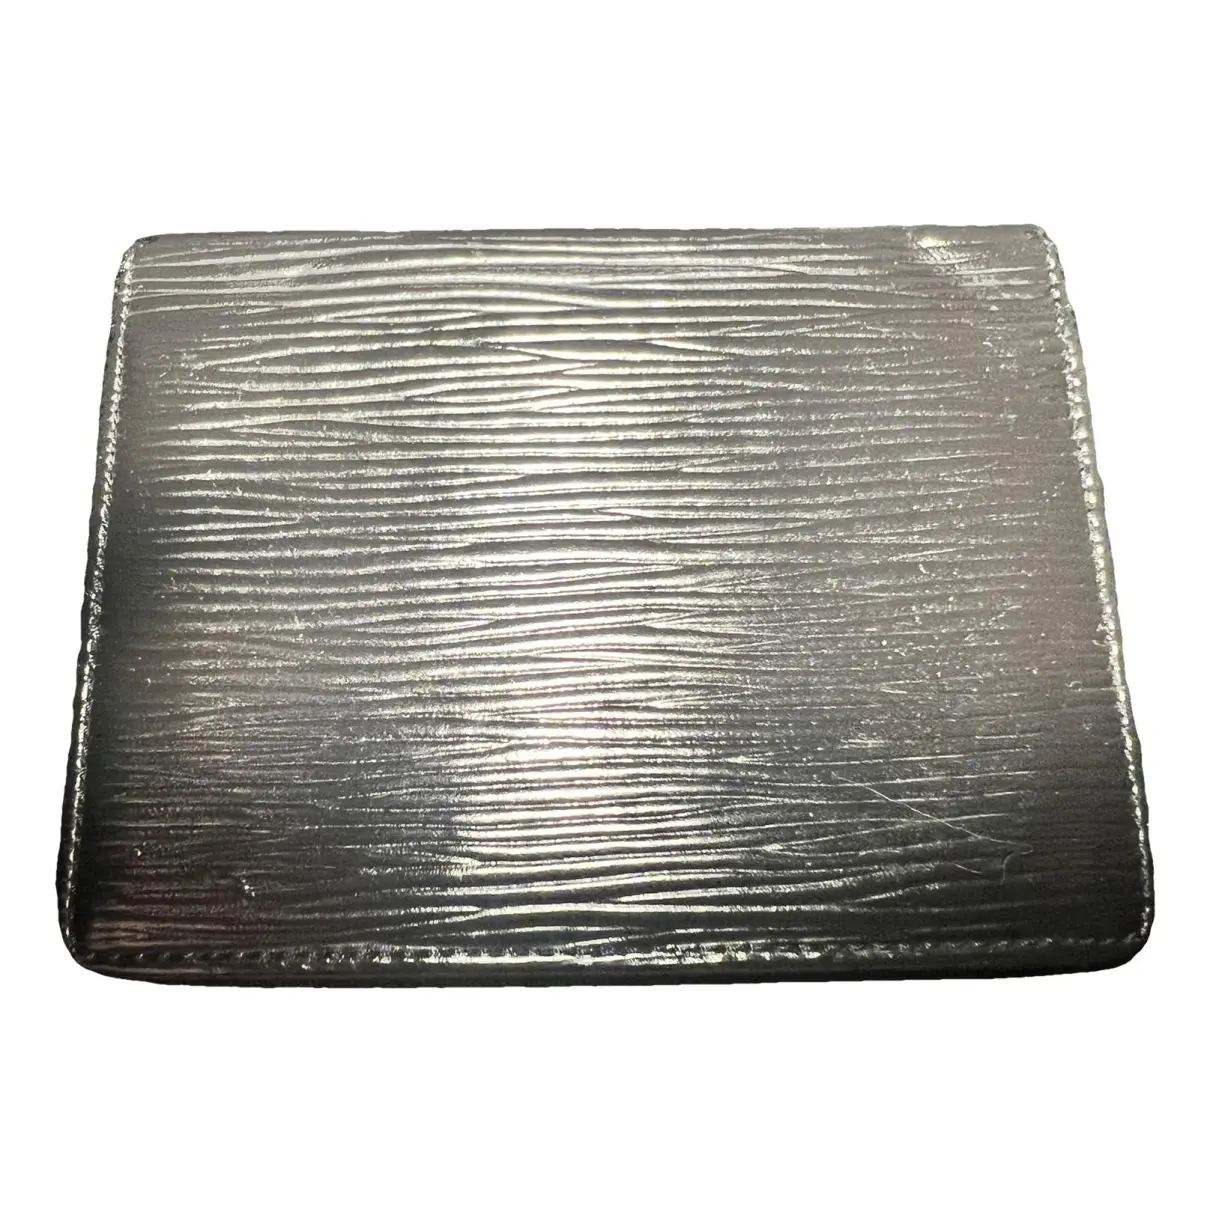  Coin Card Holder leather small bag